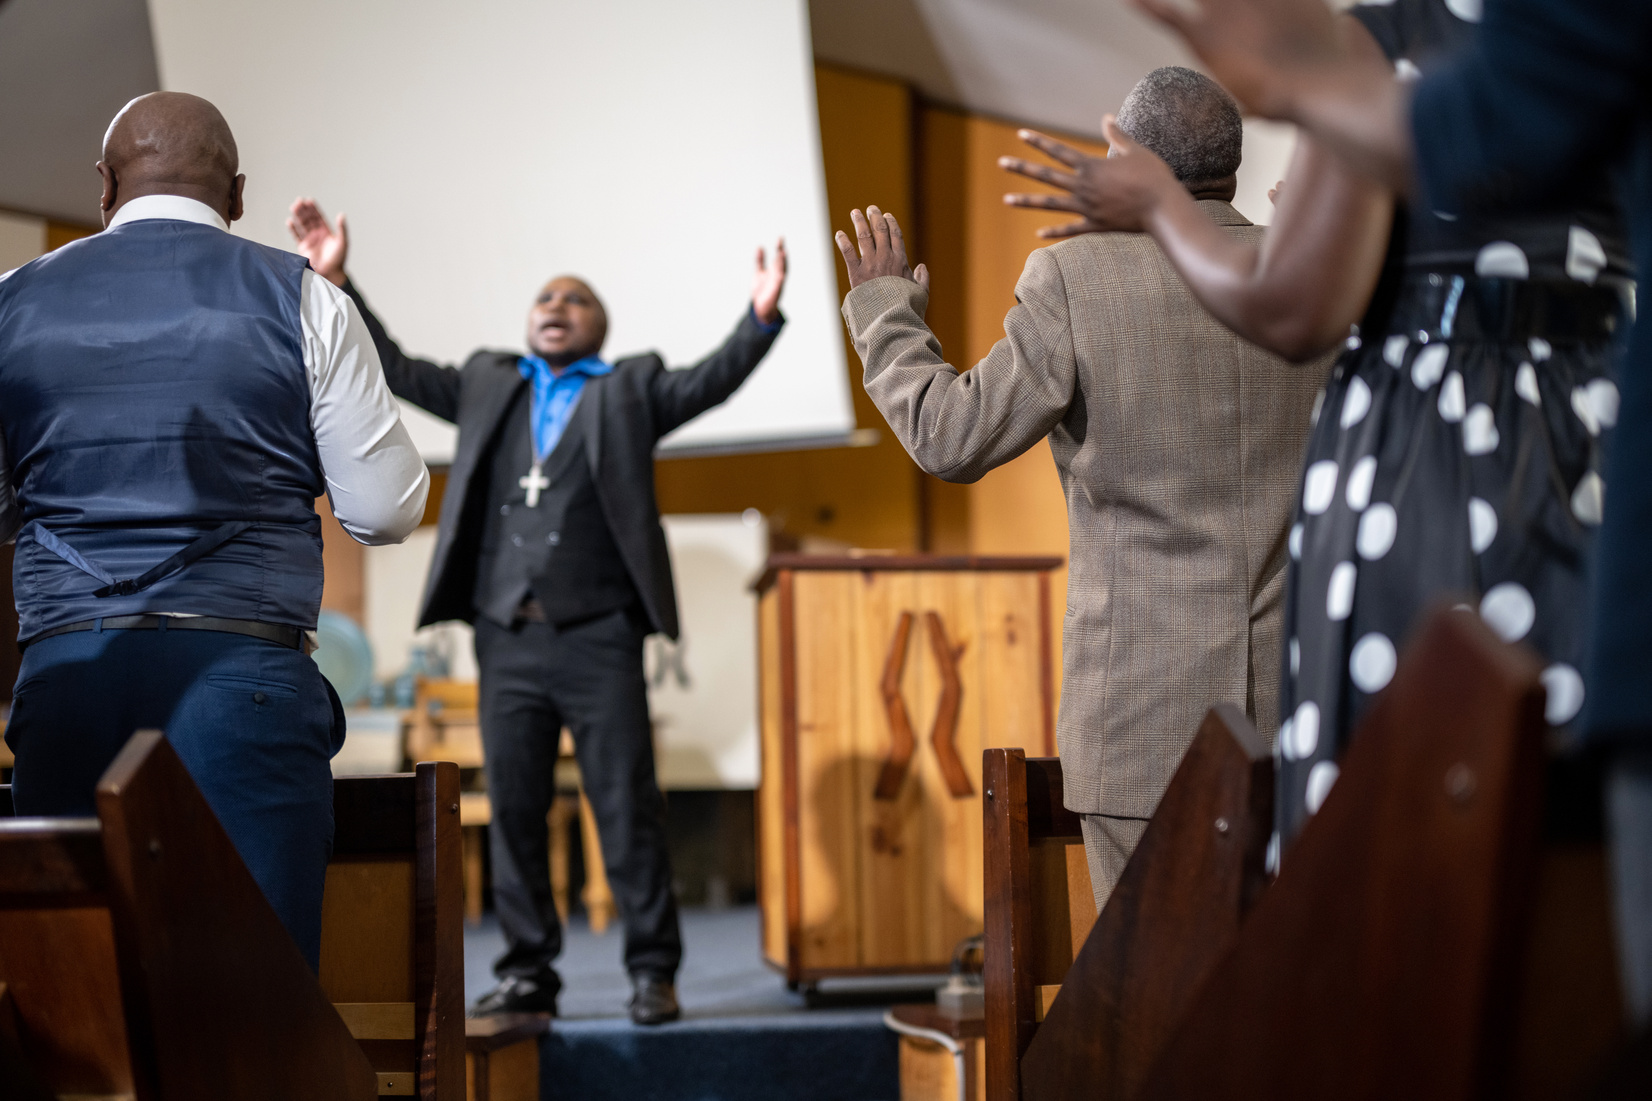 Pastor stand preaching with arms raised in front of congregation